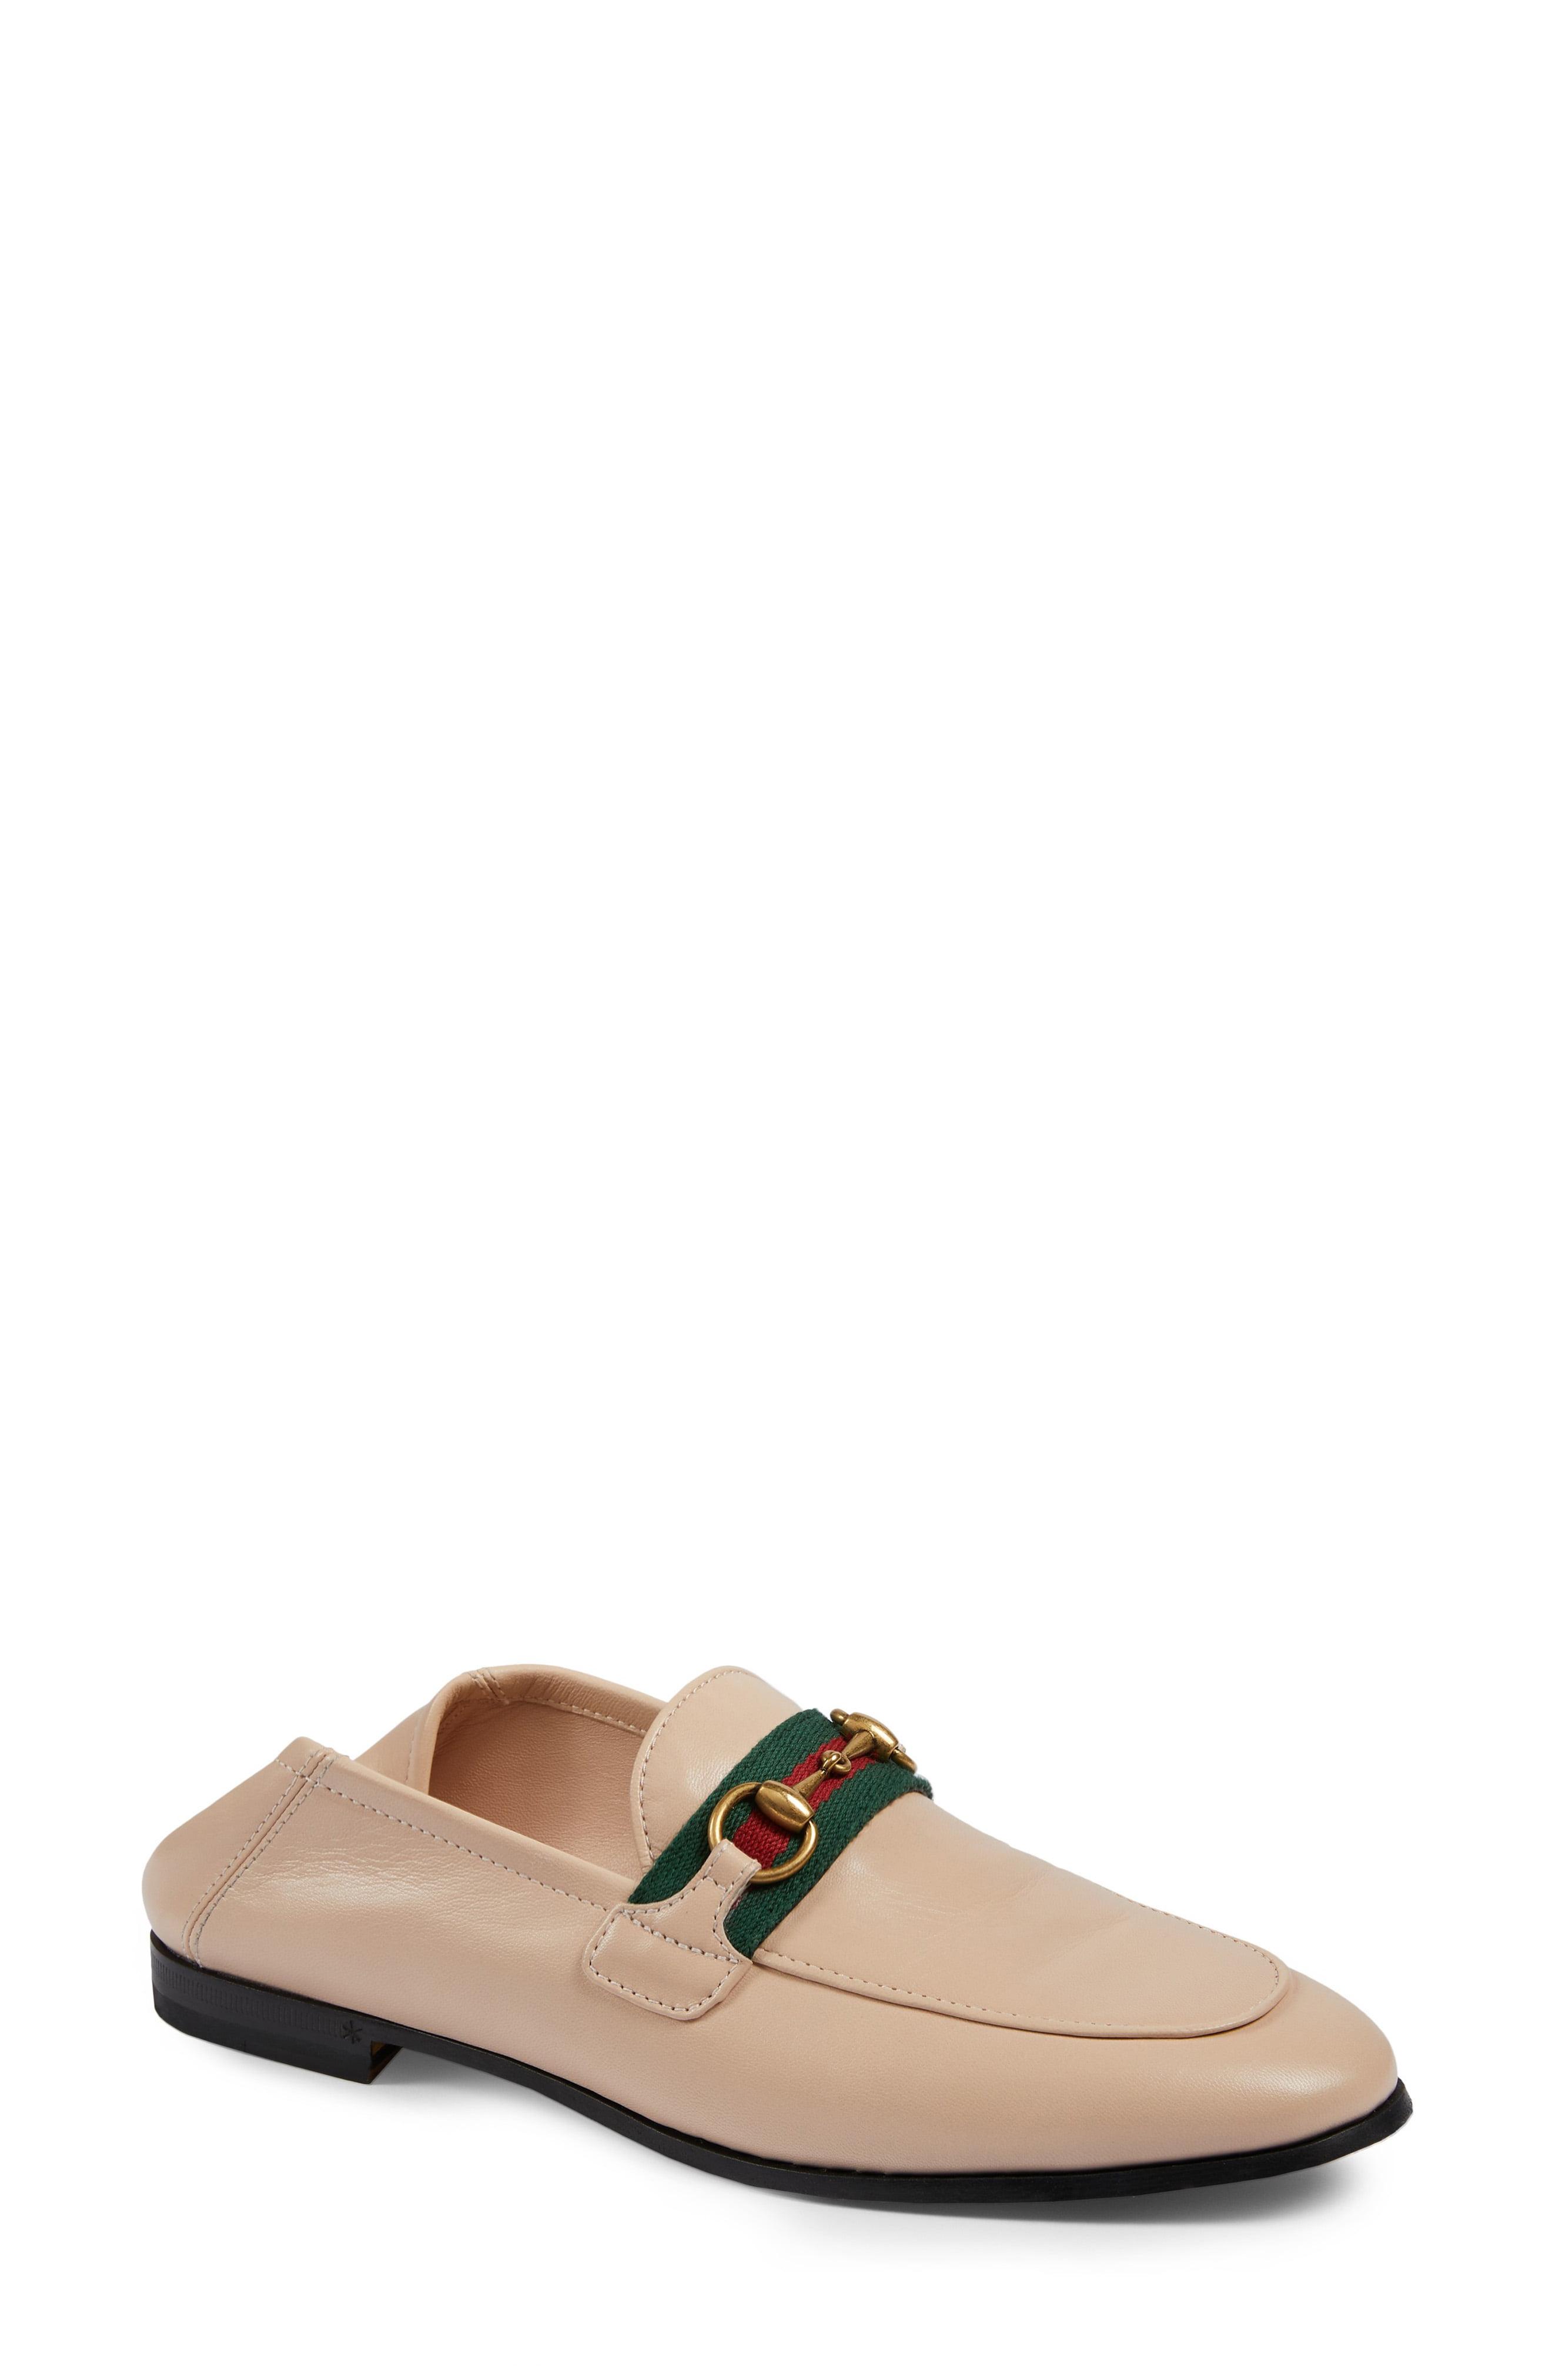 brixton convertible loafer